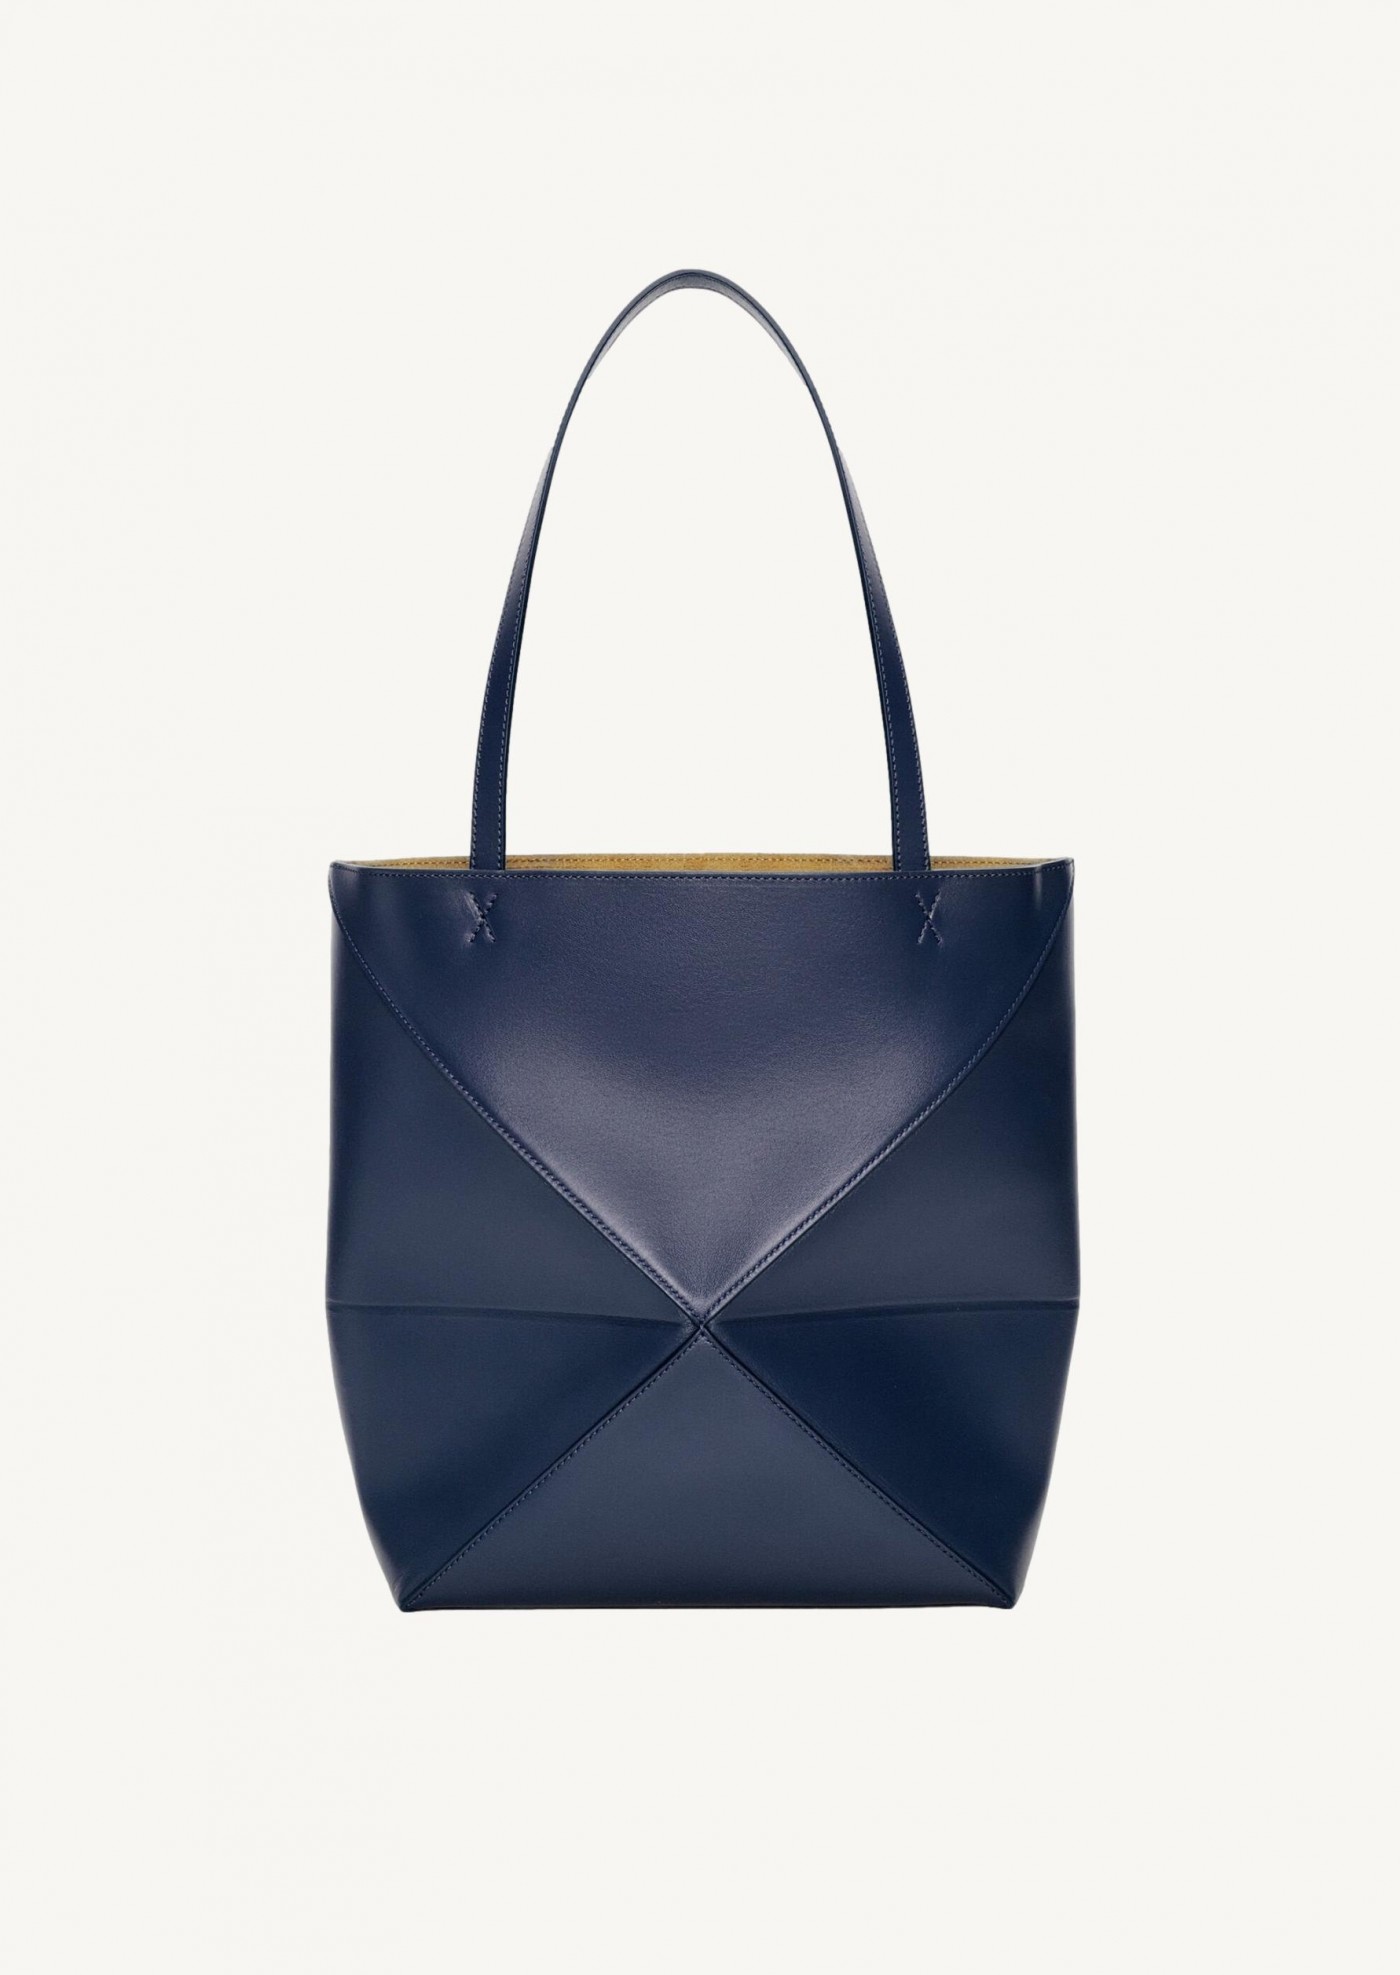 Puzzle Fold Tote in glossy blue abyss calfskin